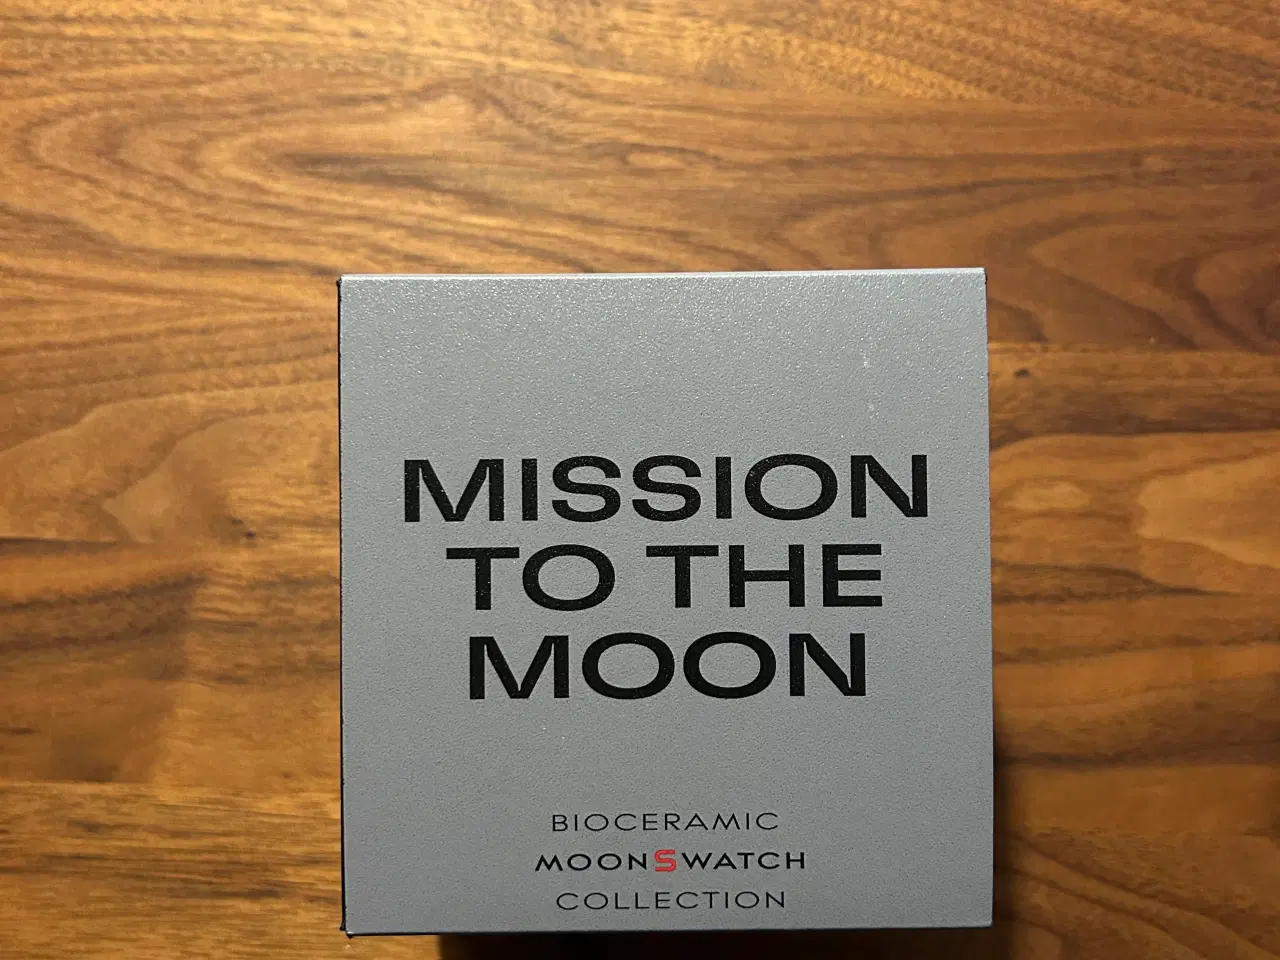 Billede 5 - Omega X Swatch MoonSwatch. Mission to the moon